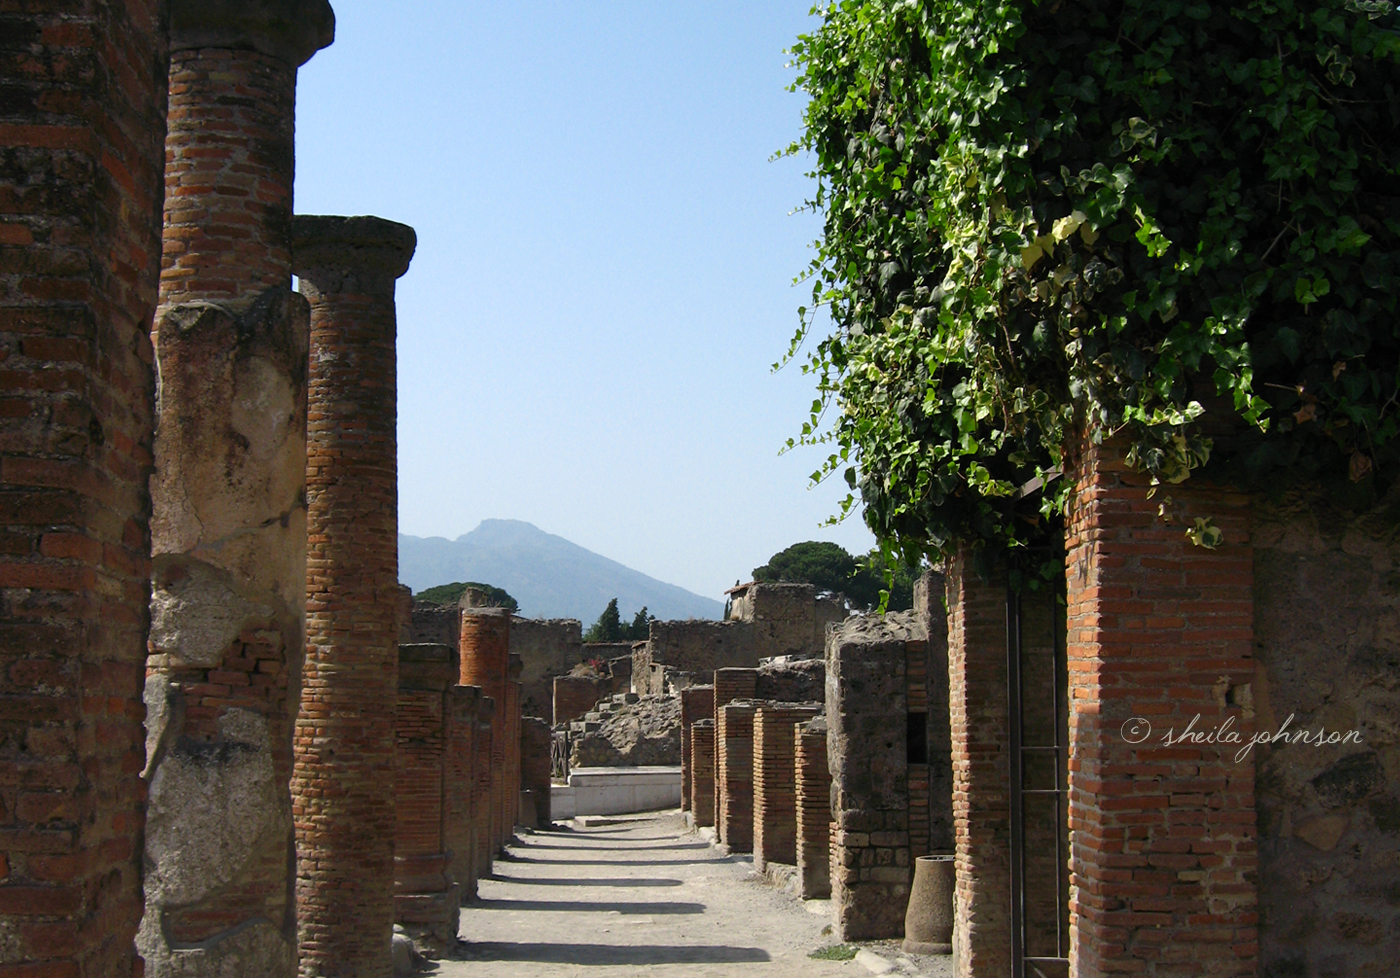 A Street In Pompeii, Italy, With Mount Vesuvius In The Background. The Eruption Of Mount Vesuvius In 79 A.d. Killed Everyone And Everything In Its Path.